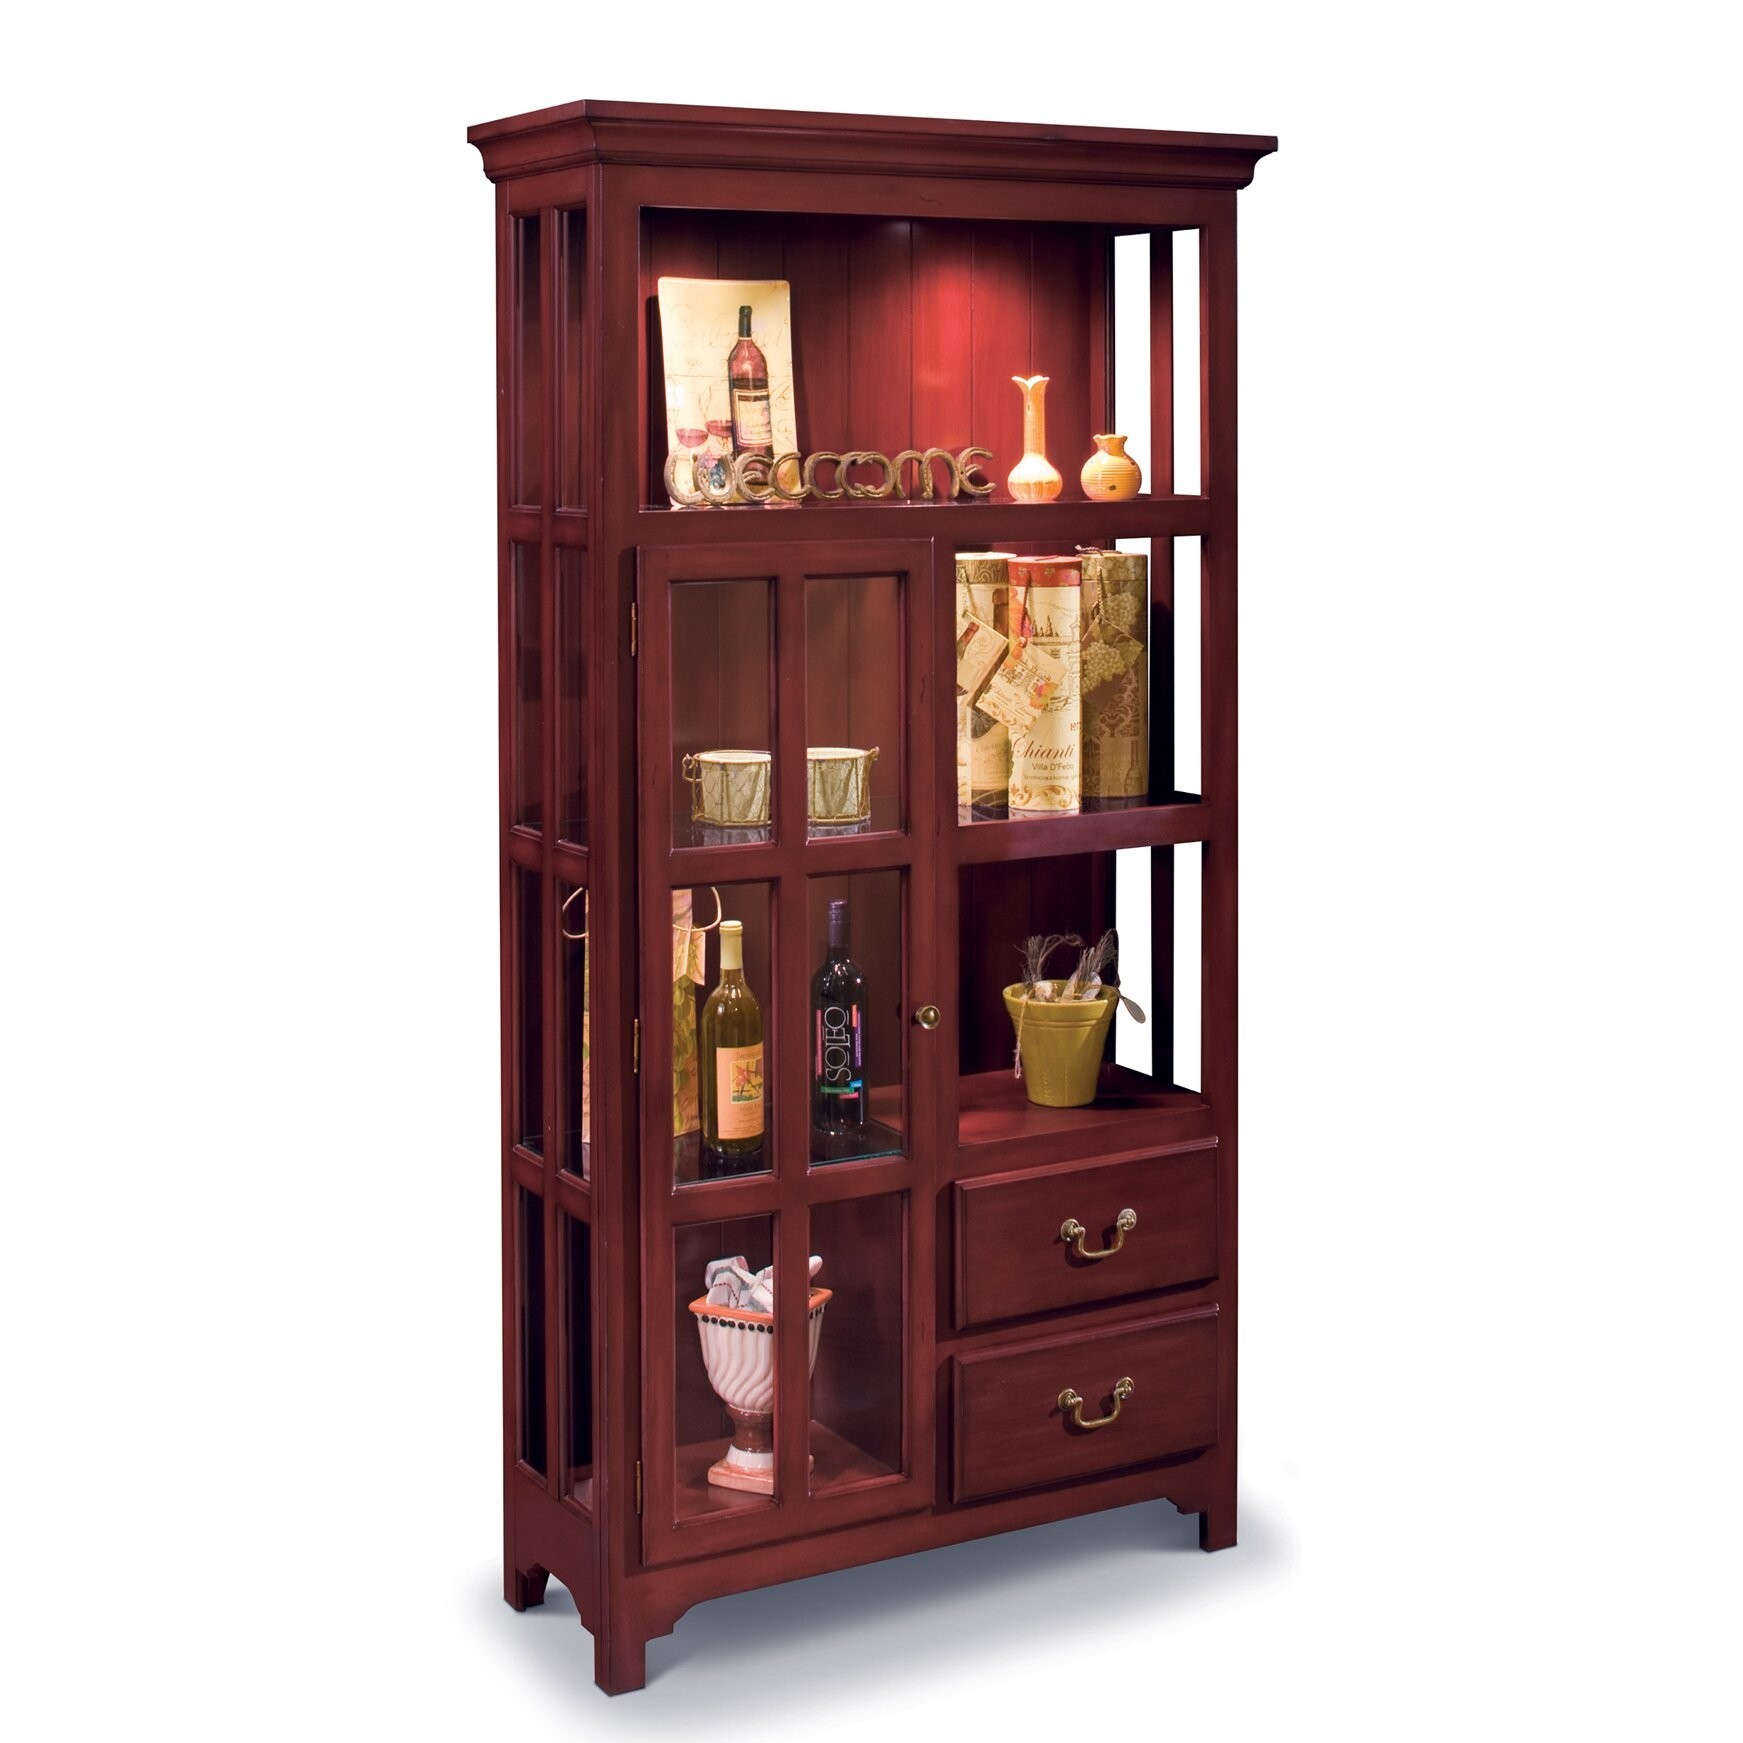 Philip reinisch co colortime solid wood curio display